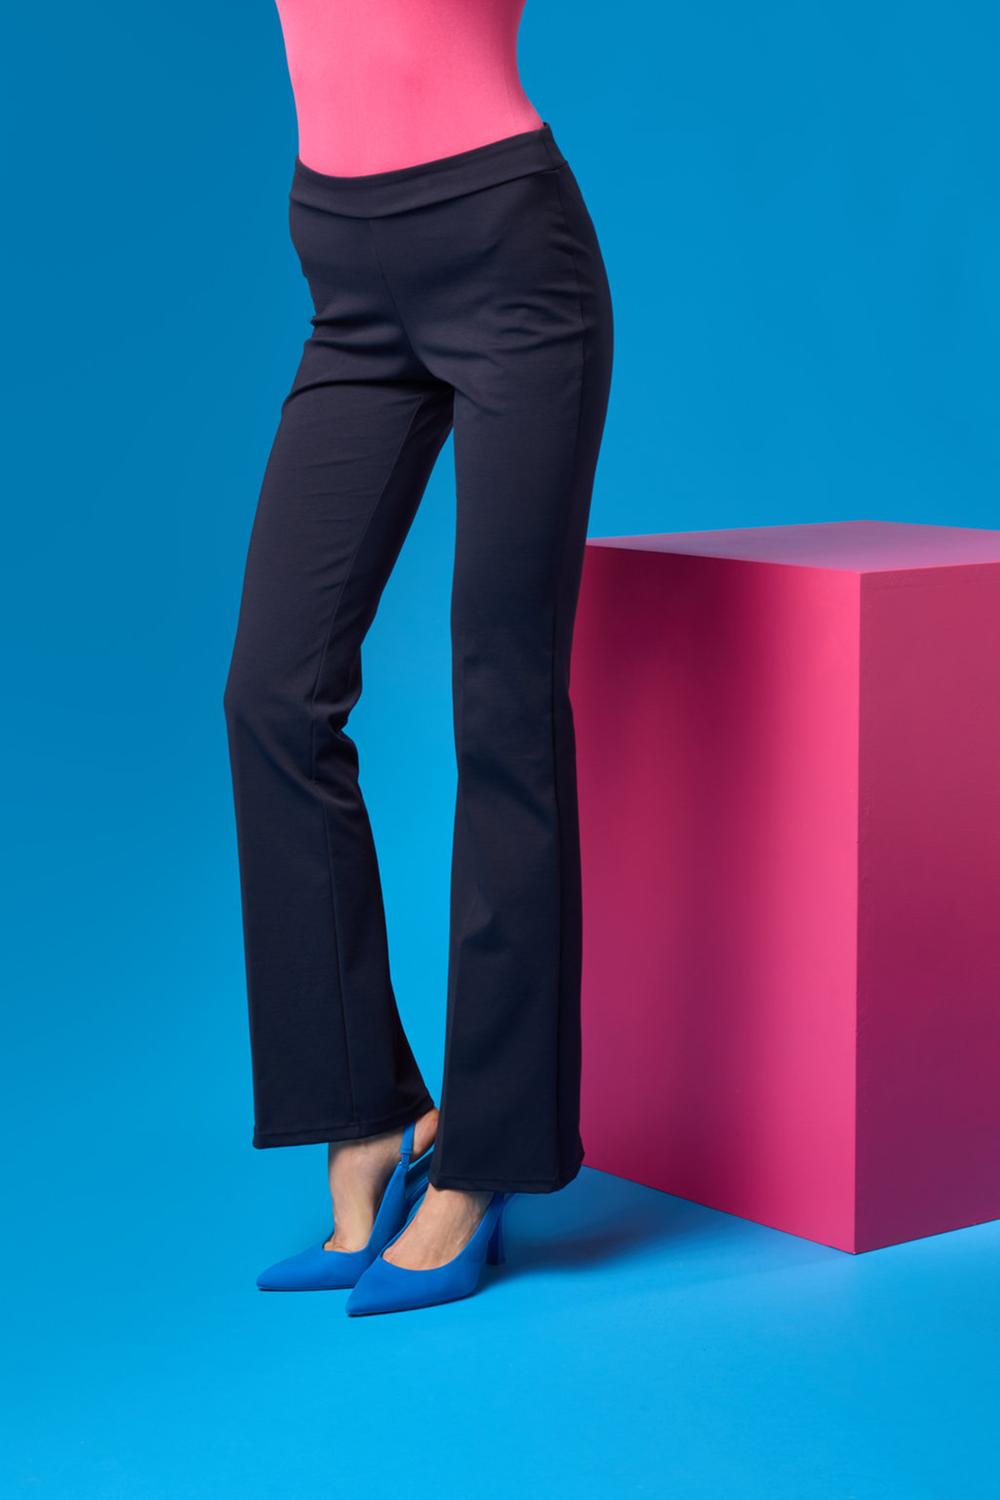 SiSi Passpartout Leggings - Soft stretched cotton mix high waisted trouser leggings (treggings) that are flared at the bottom. Available in black and navy.